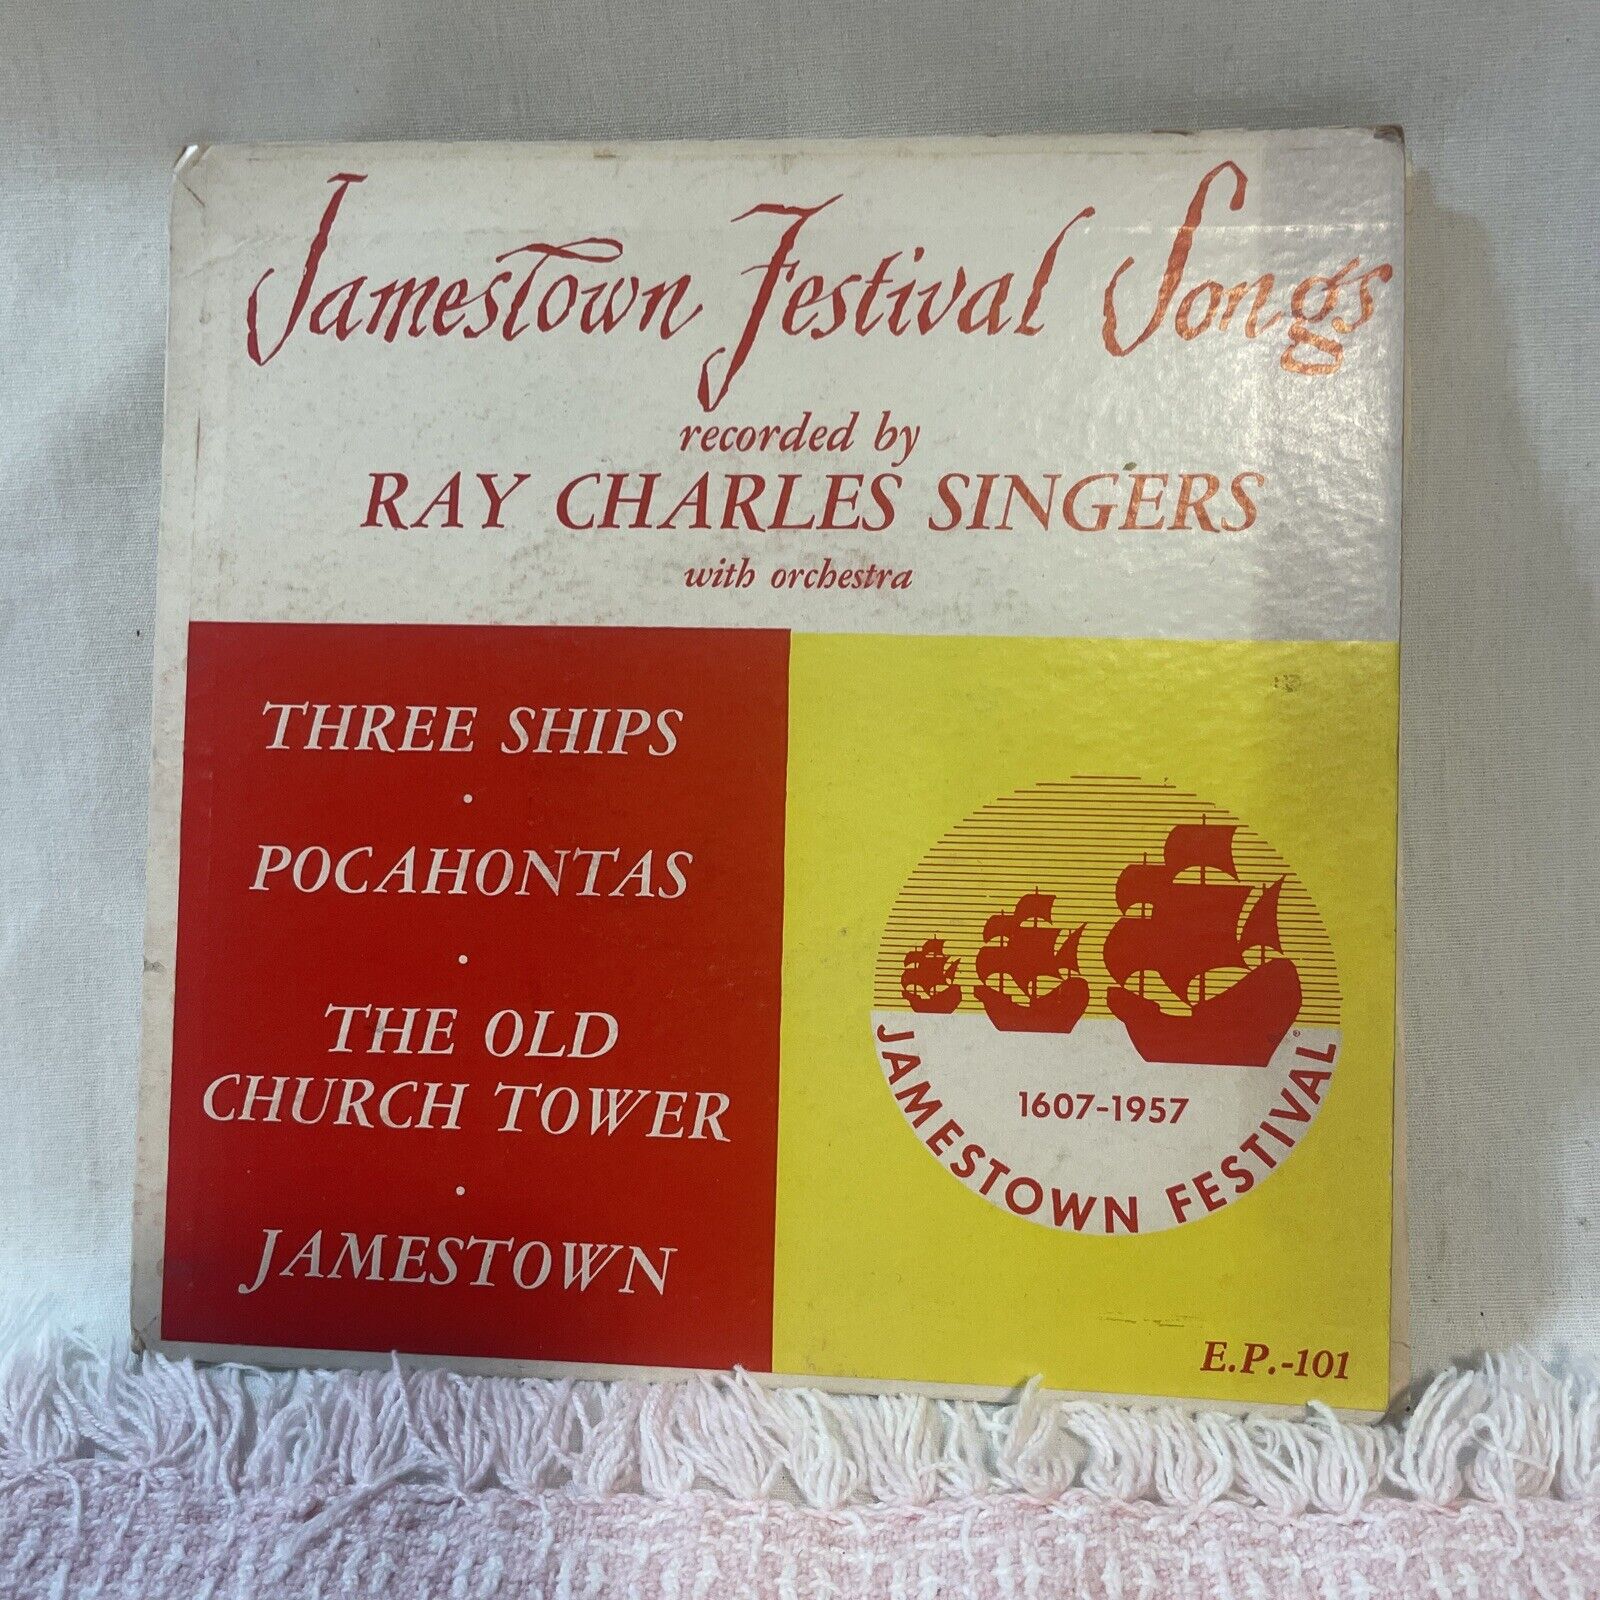 Vintage Ray Charles Singers Jamestown Festival Songs 45RPM Record